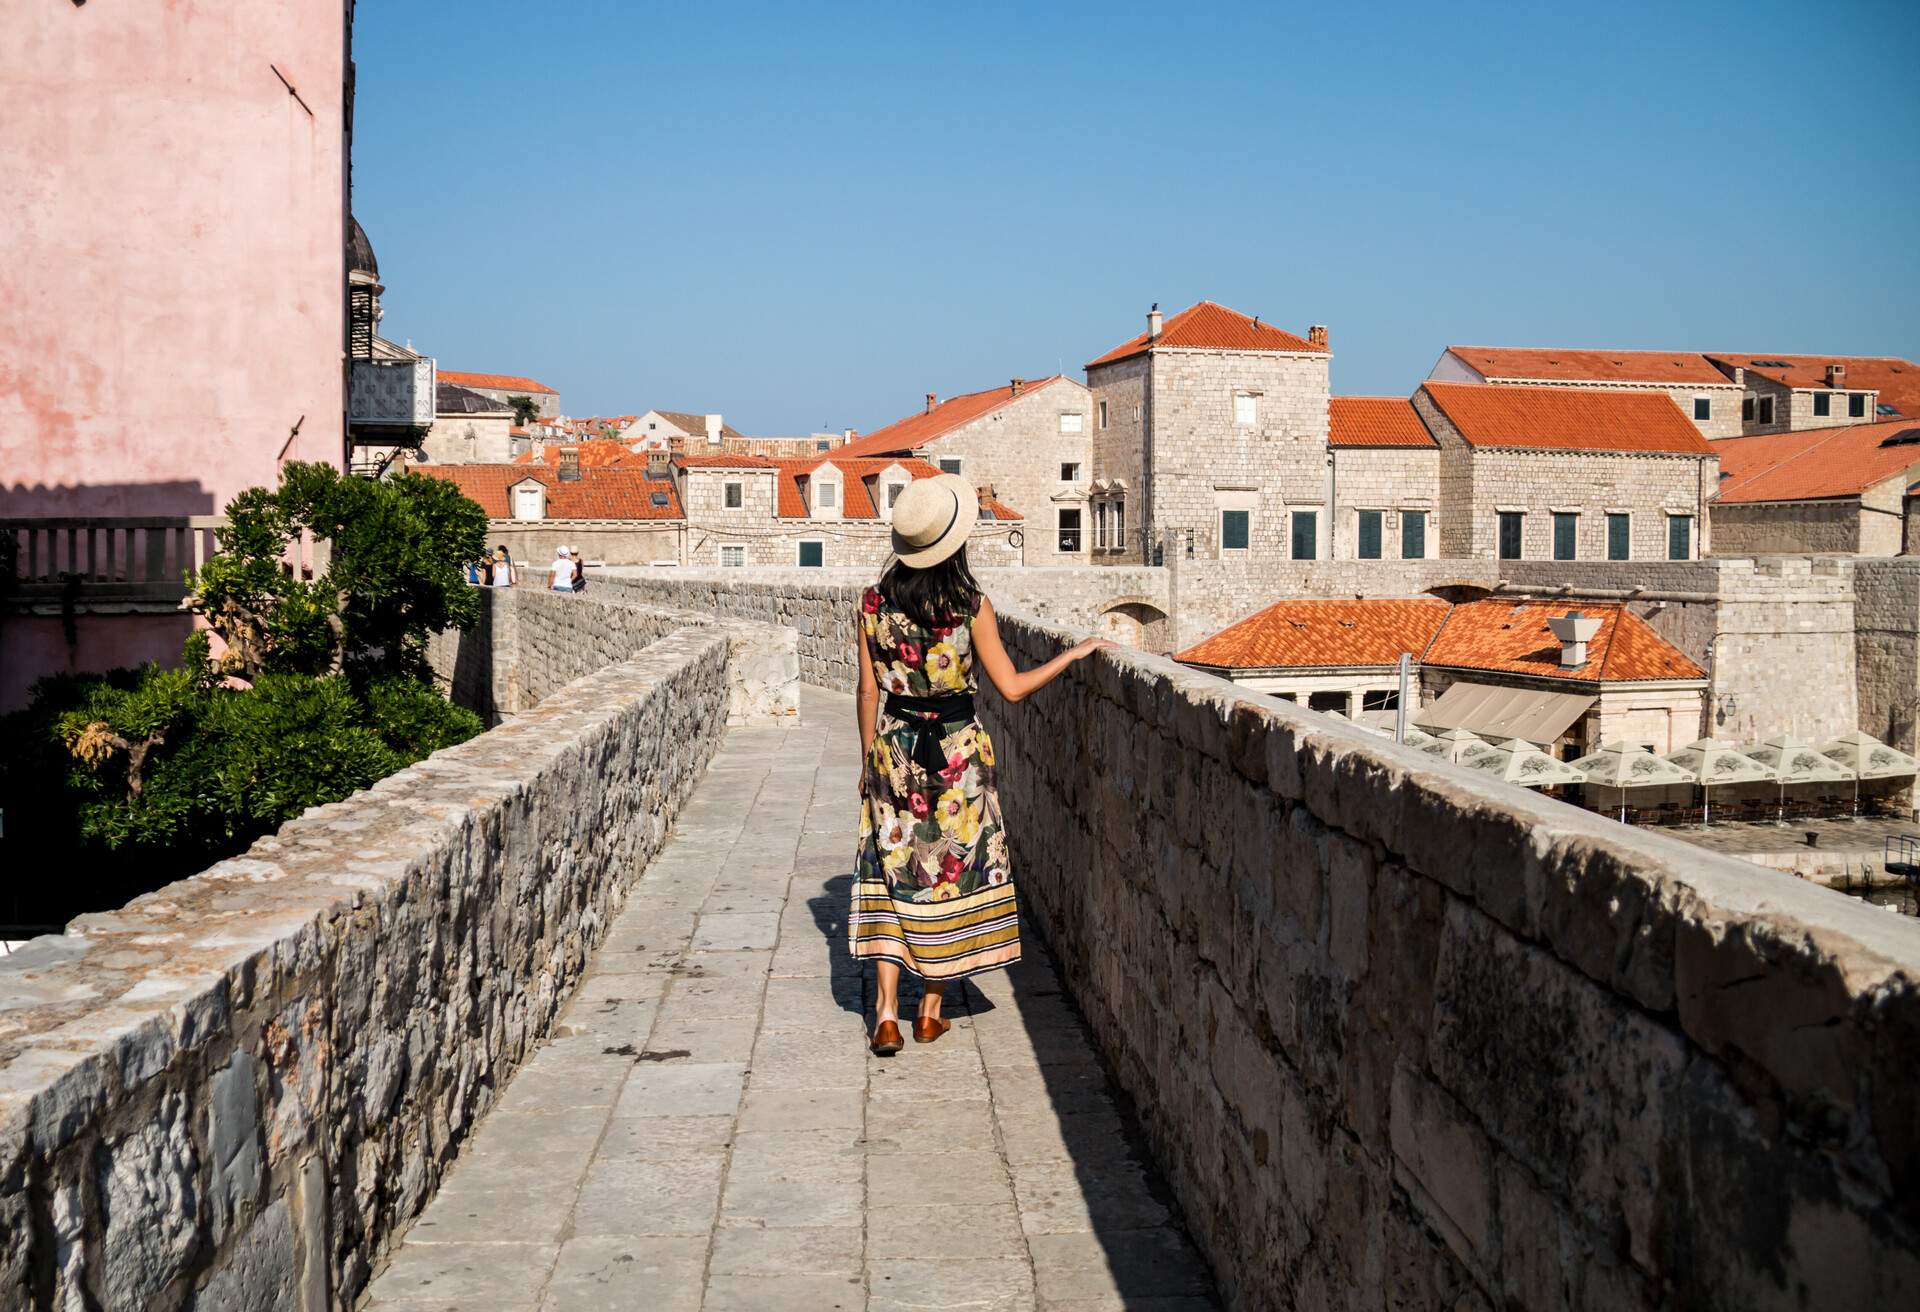 A woman is walking along the Walls of Dubrovnik - a series of defensive stone walls surrounding the city and one of the main attractions in the city. Dubrovnik, Croatia - August 5, 2017